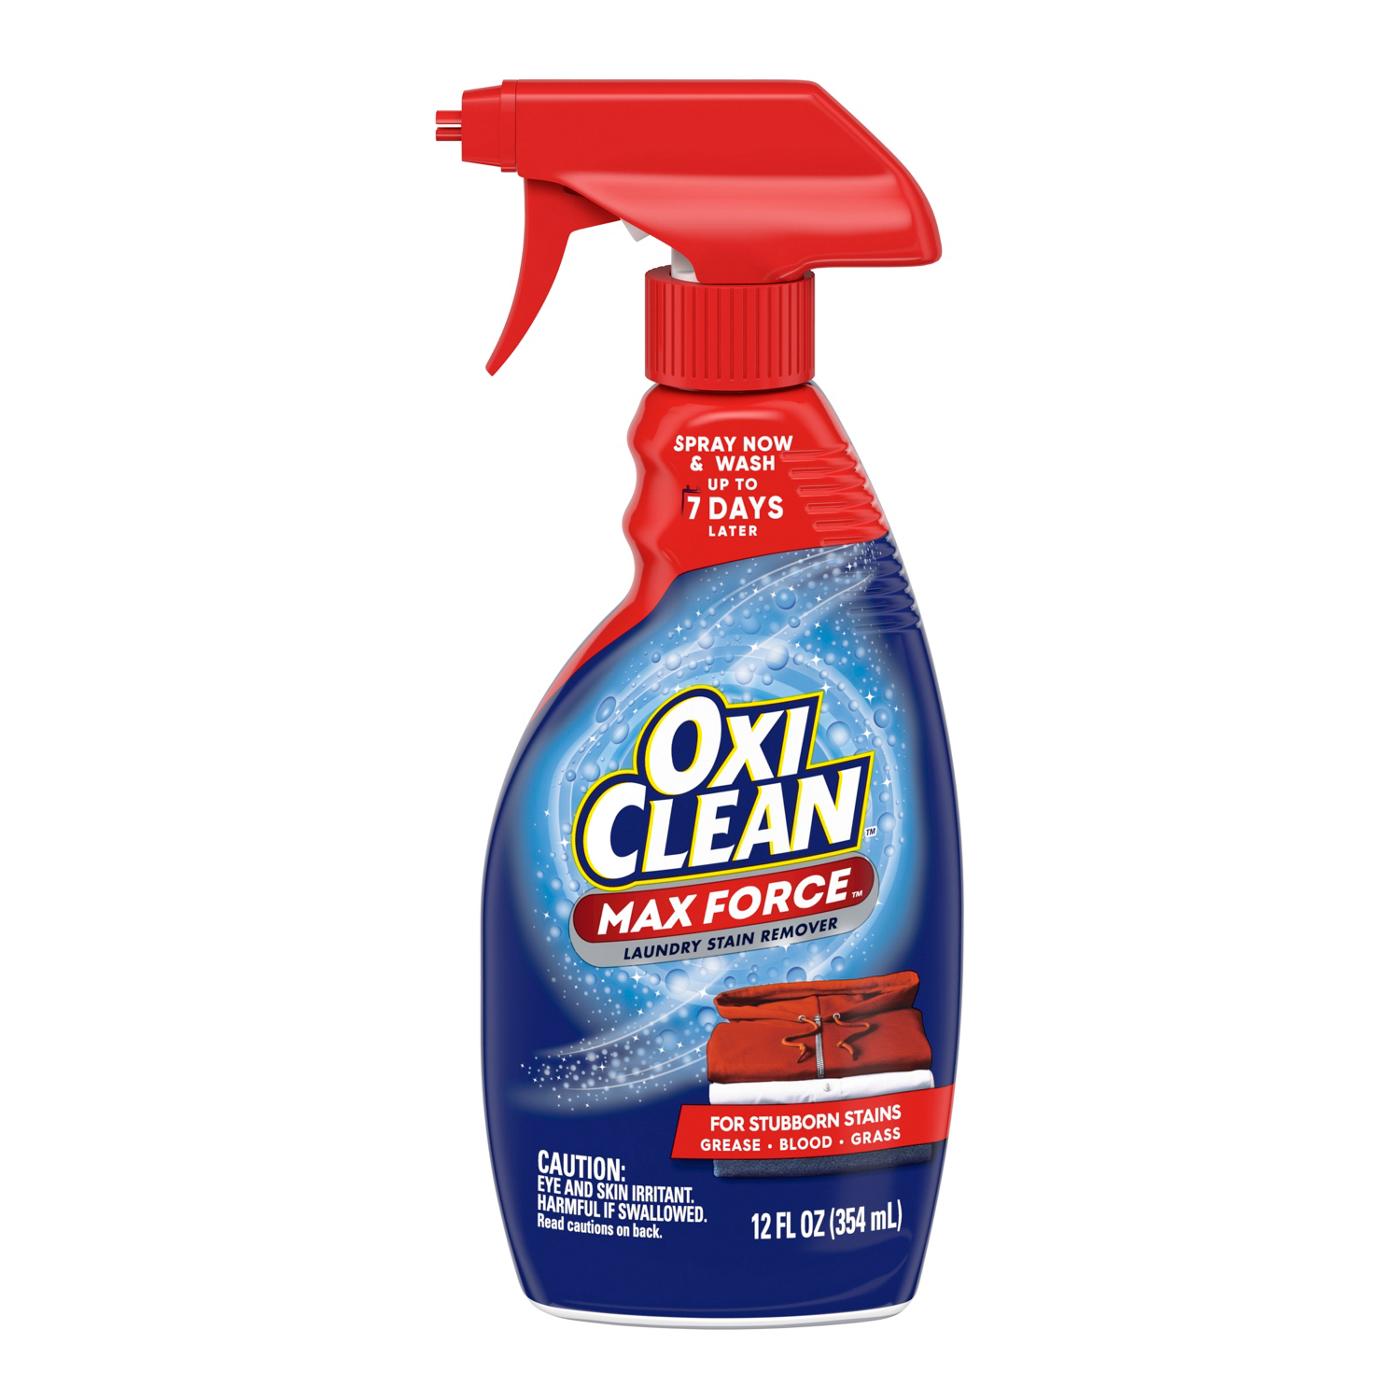 OxiClean Max Force Laundry Stain Remover; image 1 of 4